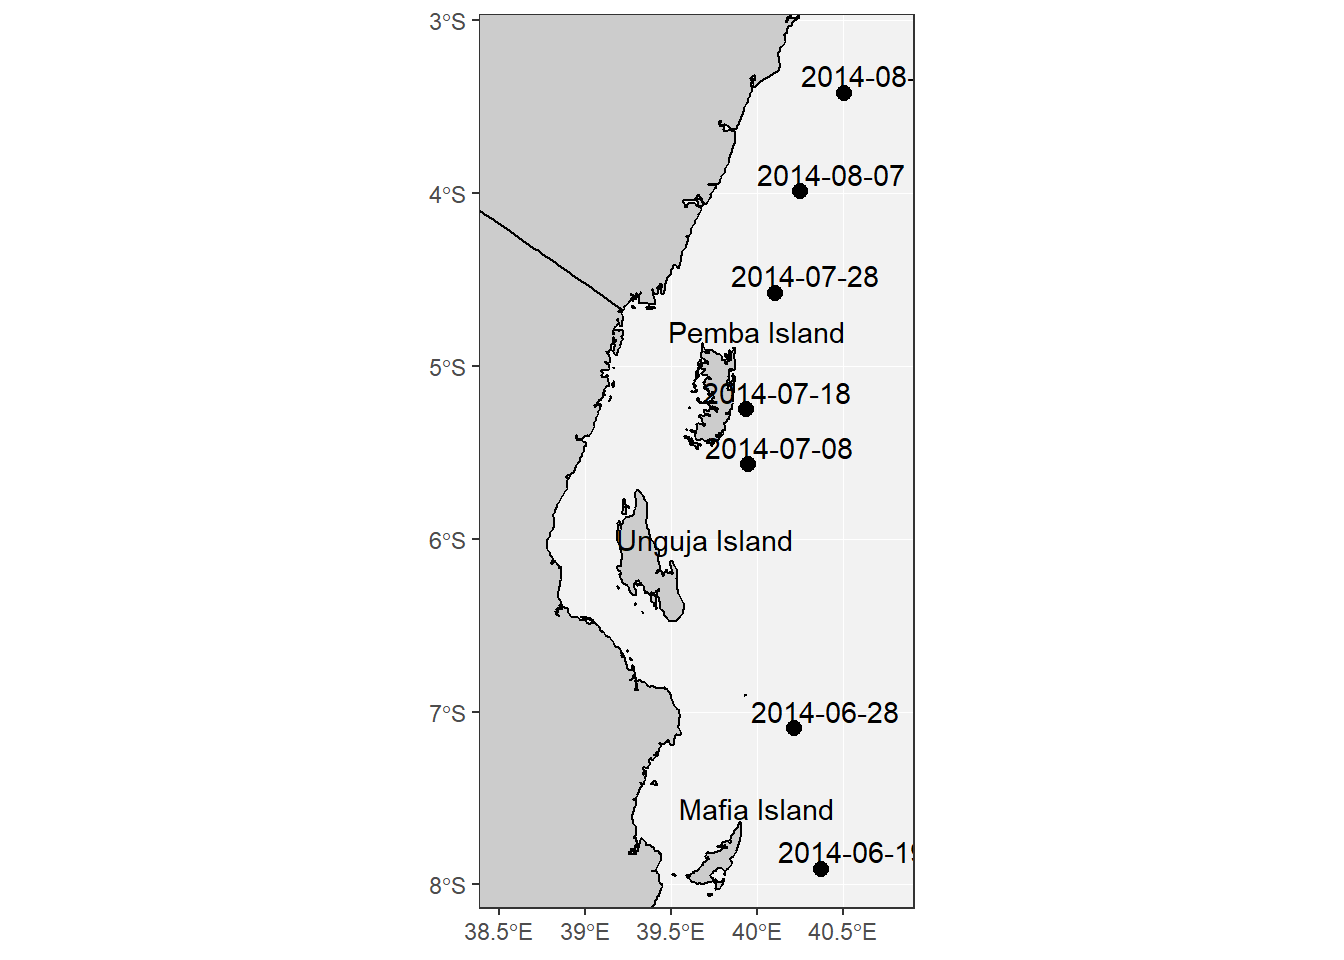 Map of the East African Coast showing the location of the Argo float profiles and the date the records were measured